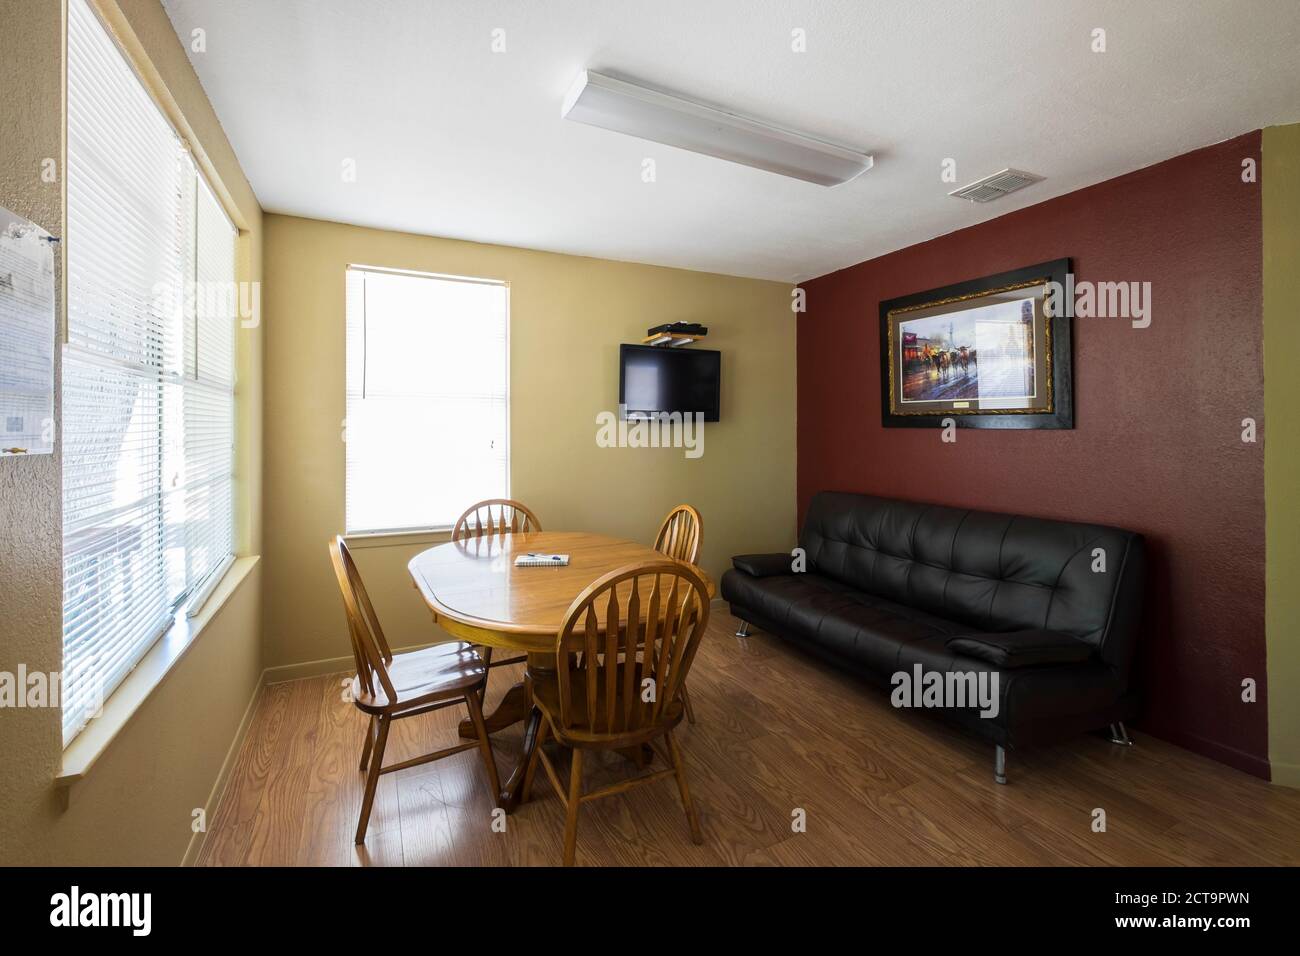 USA, Texas, Livingroom in a Vacation Home Stock Photo